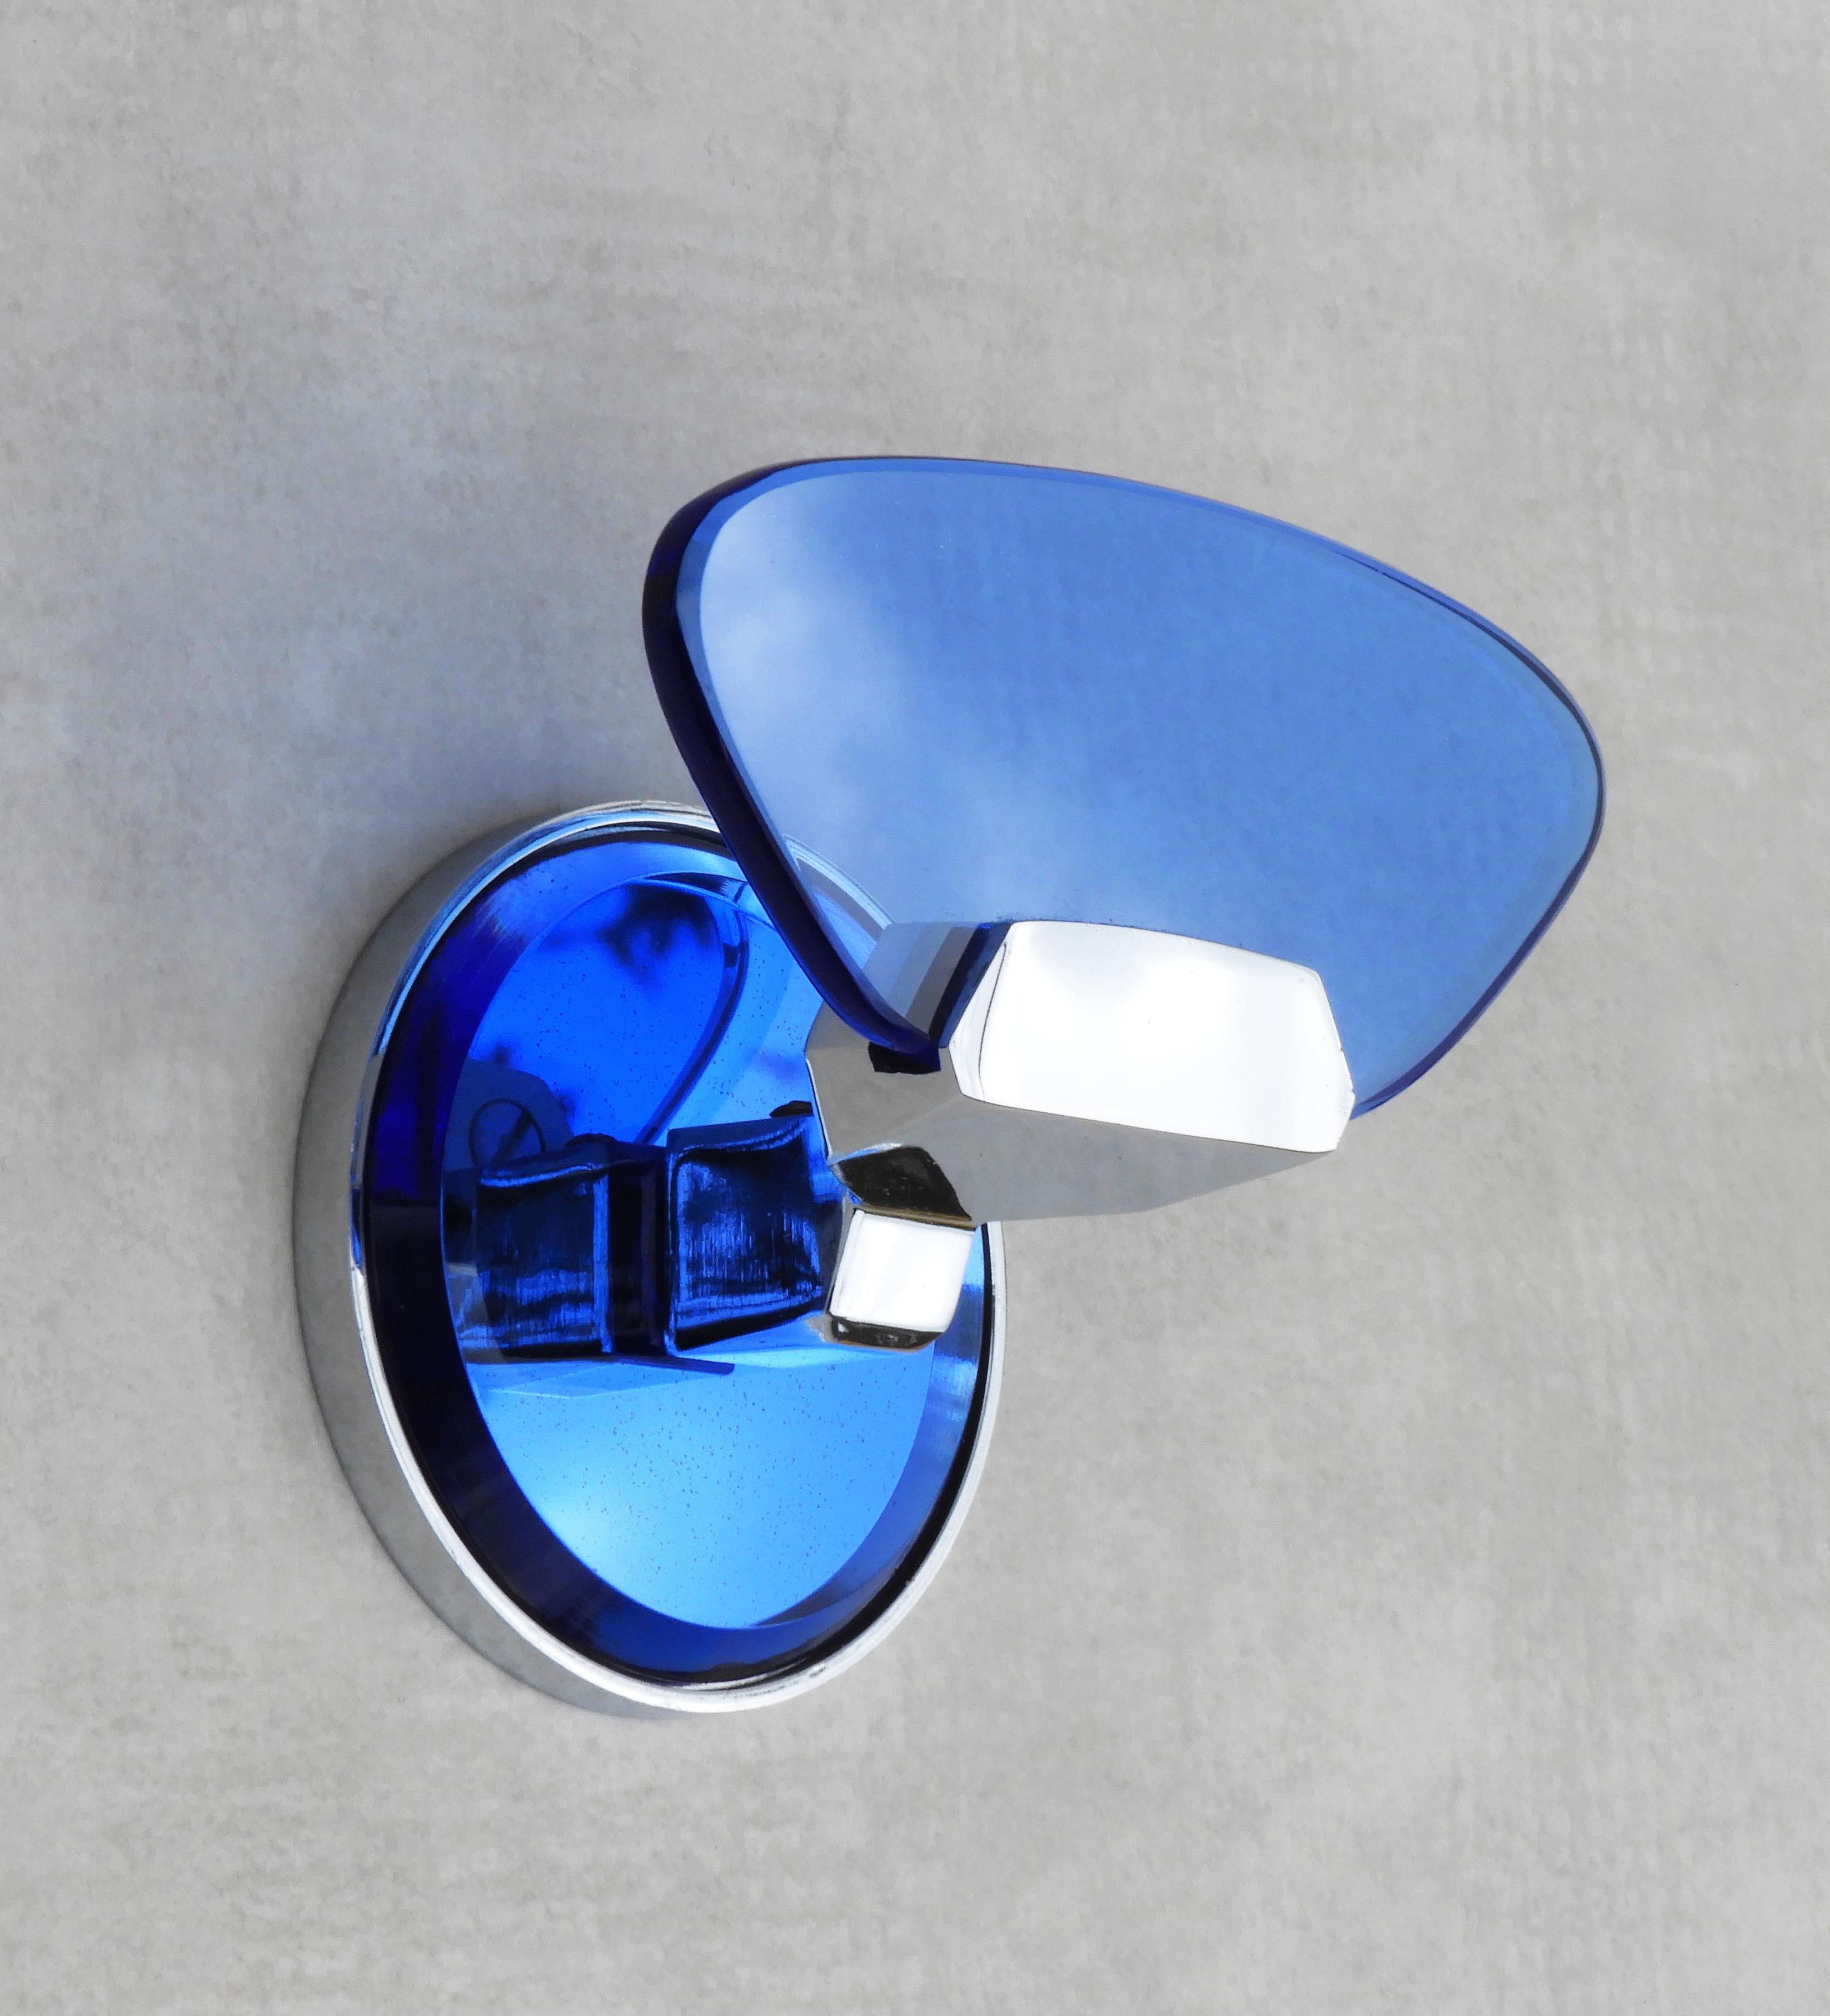 Italian design coat hooks from Veca C1970.   Attractive blue glass on a chromed frame with a mirrored back plate. Part of a selection of accessories and wall lights available in the same style  - please see our other listings. 
In good vintage